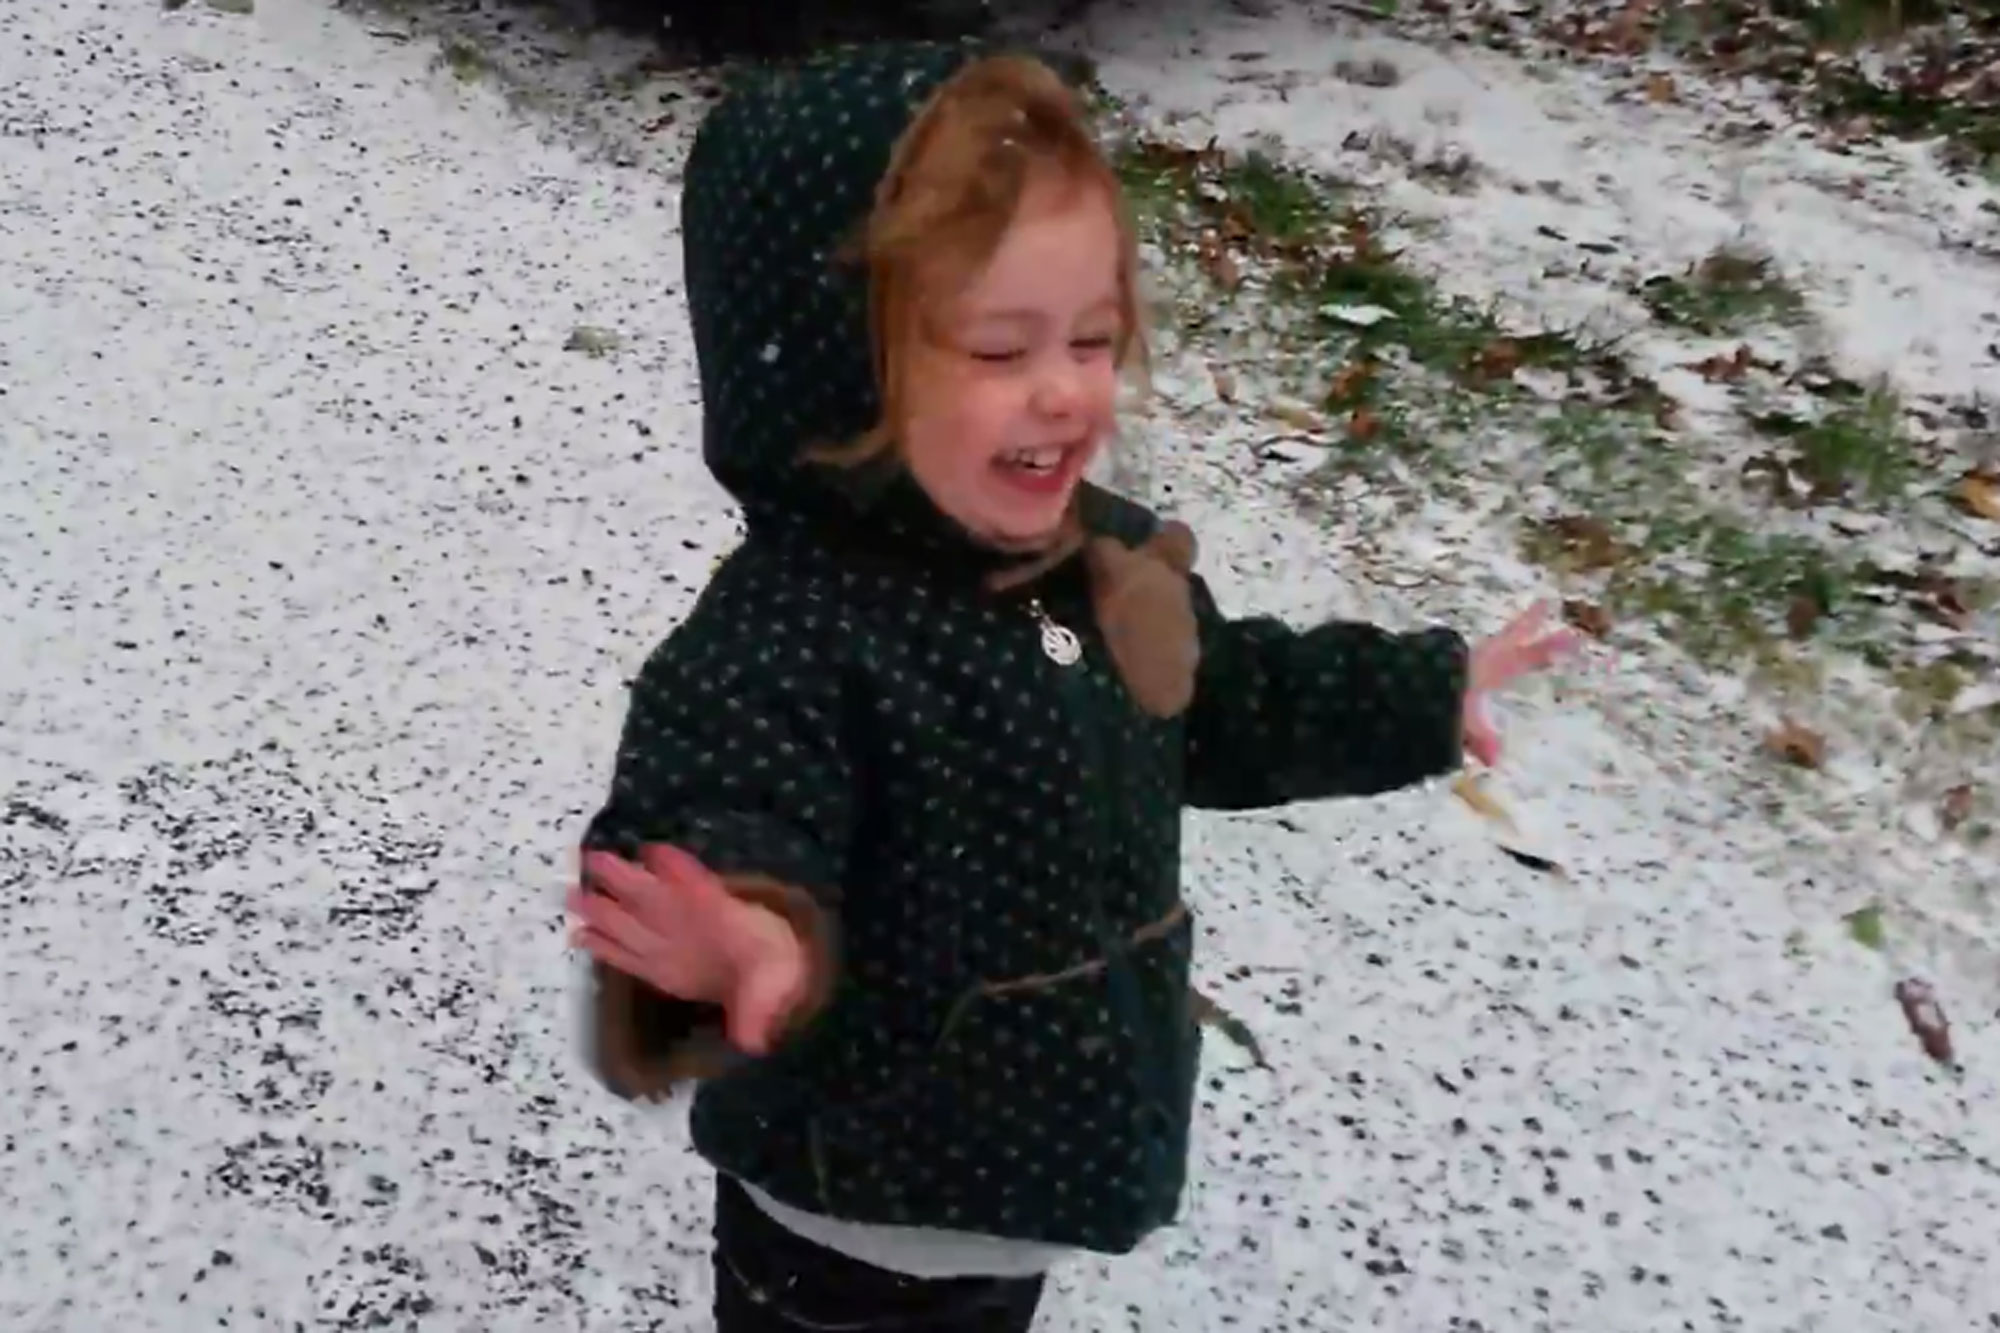 Little Girl Excitedly Experiences Her First Snowfall | PEOPLE.com